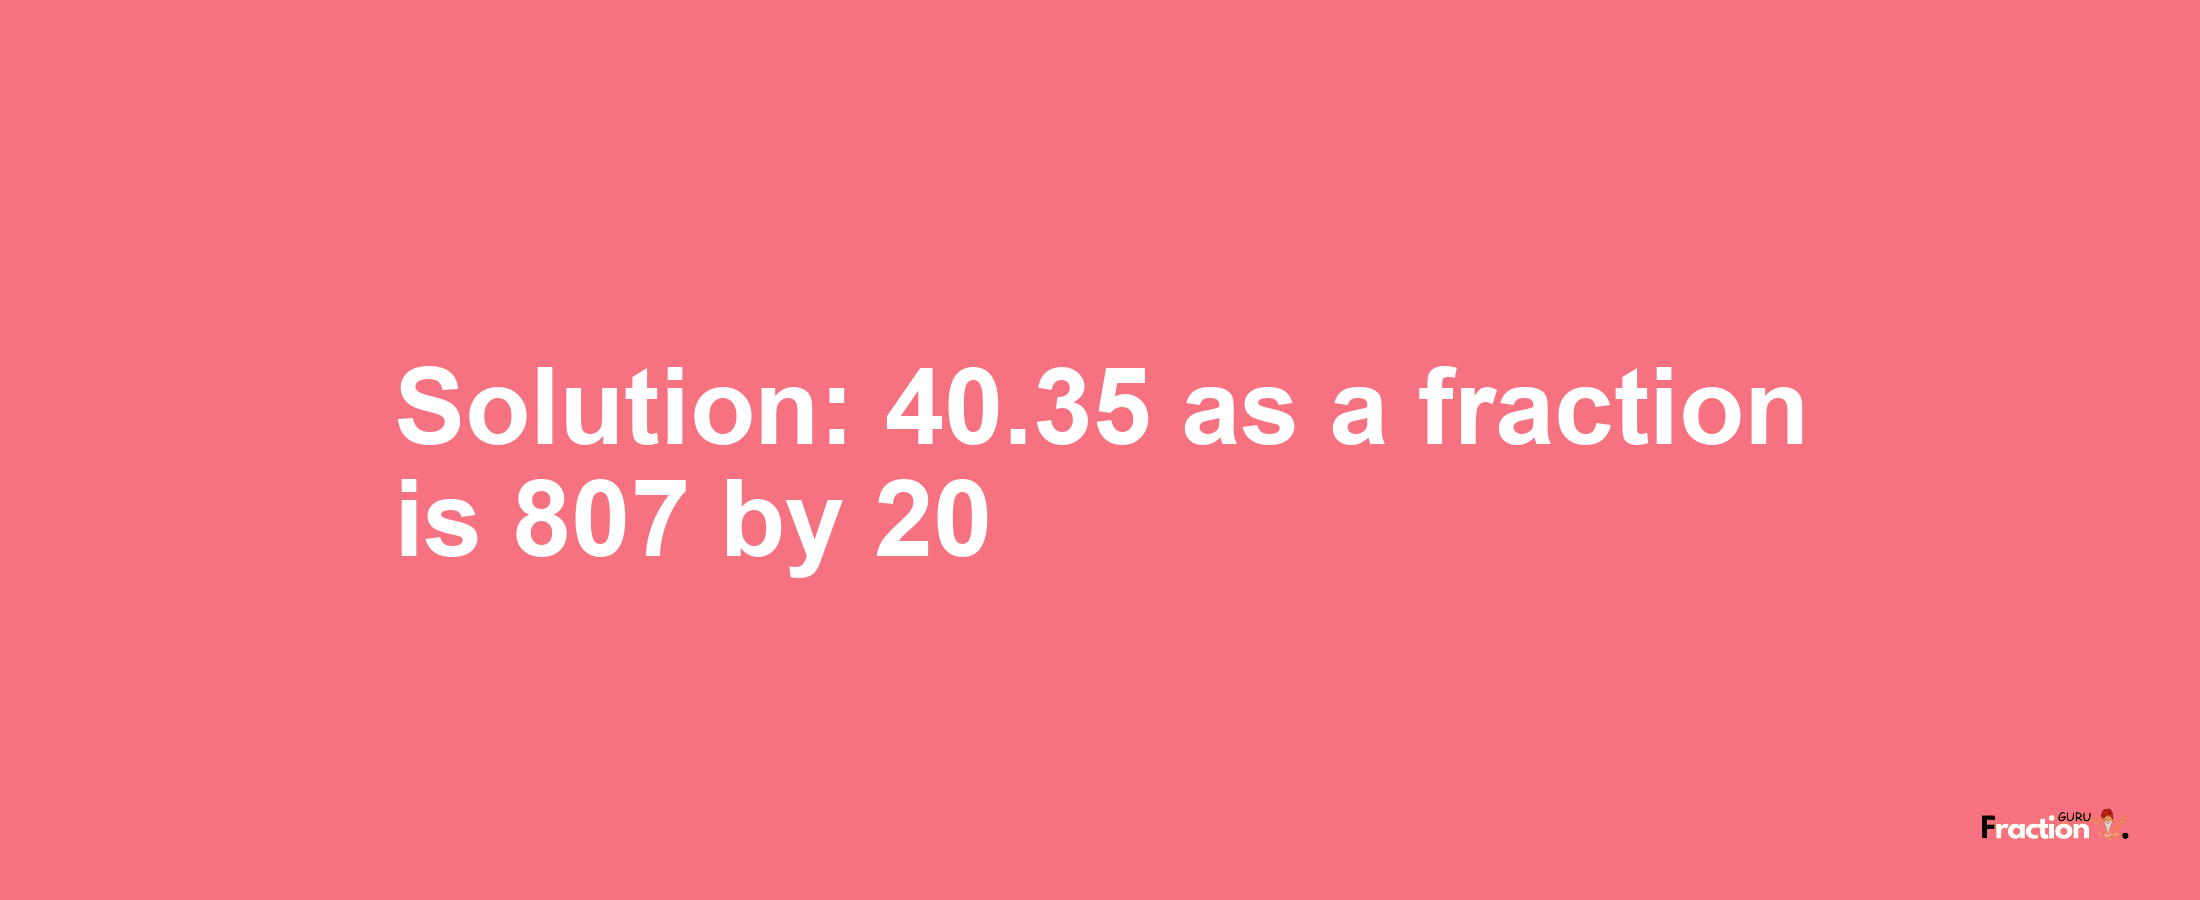 Solution:40.35 as a fraction is 807/20